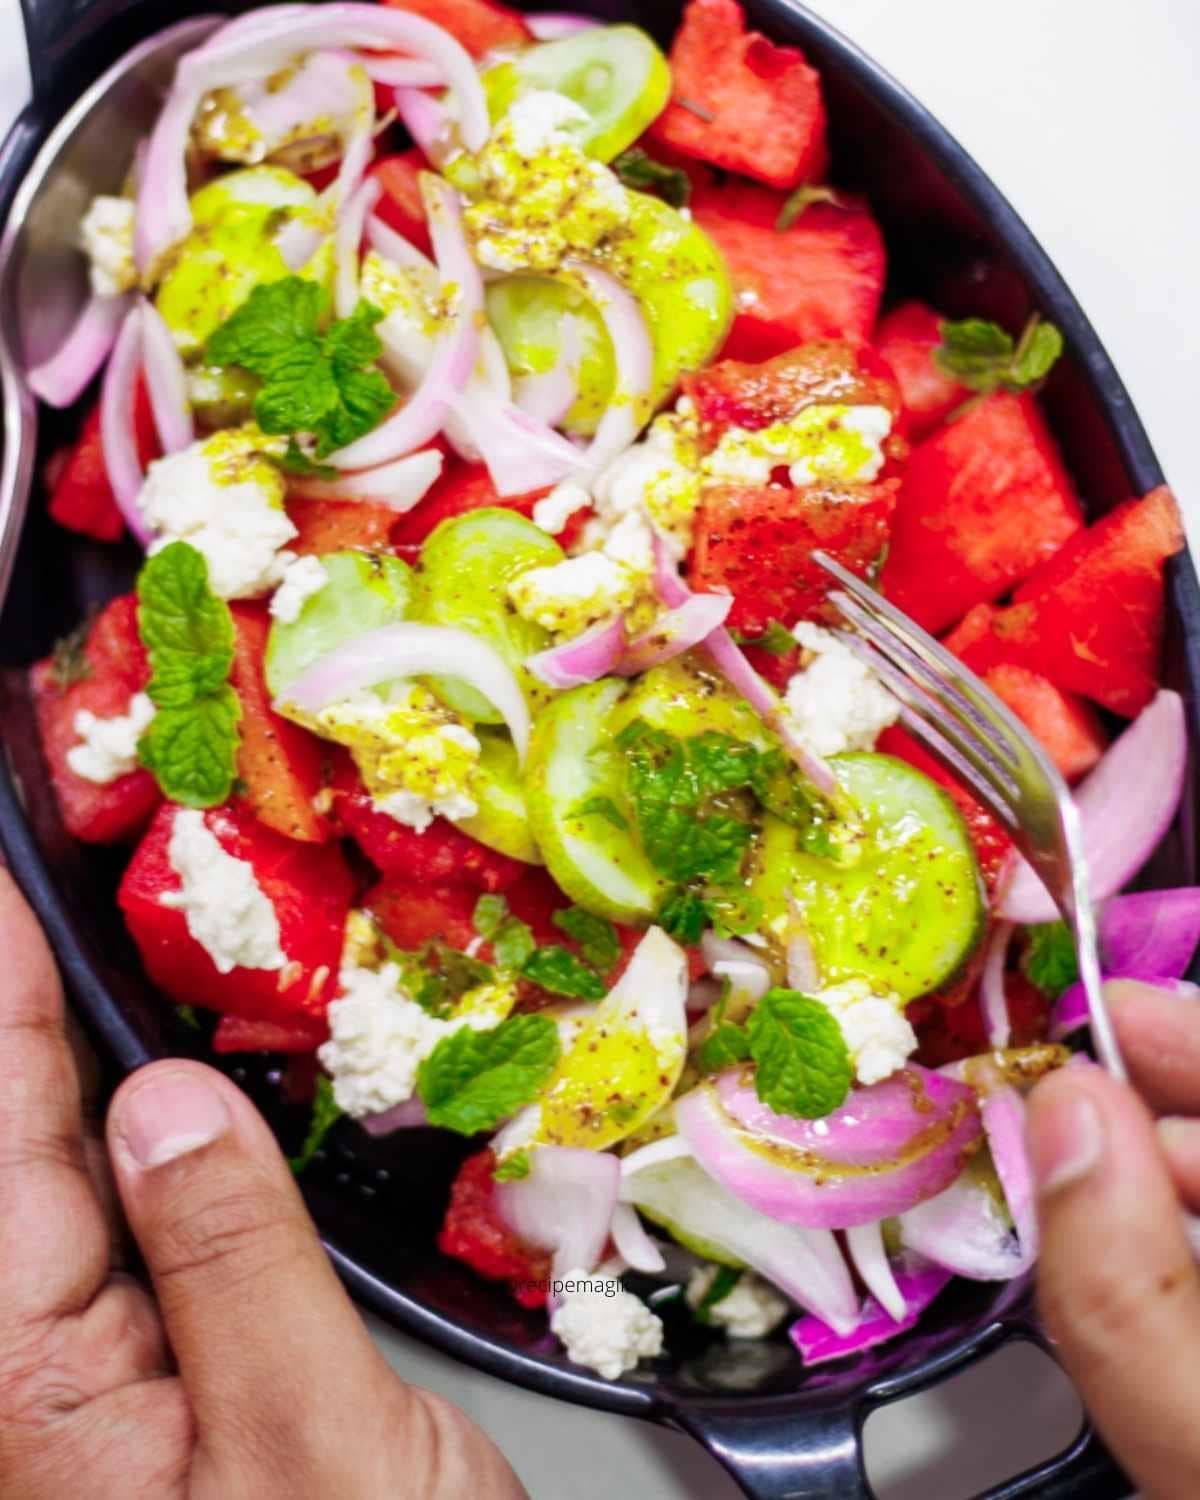 Watermelon Feta Salad with red onions